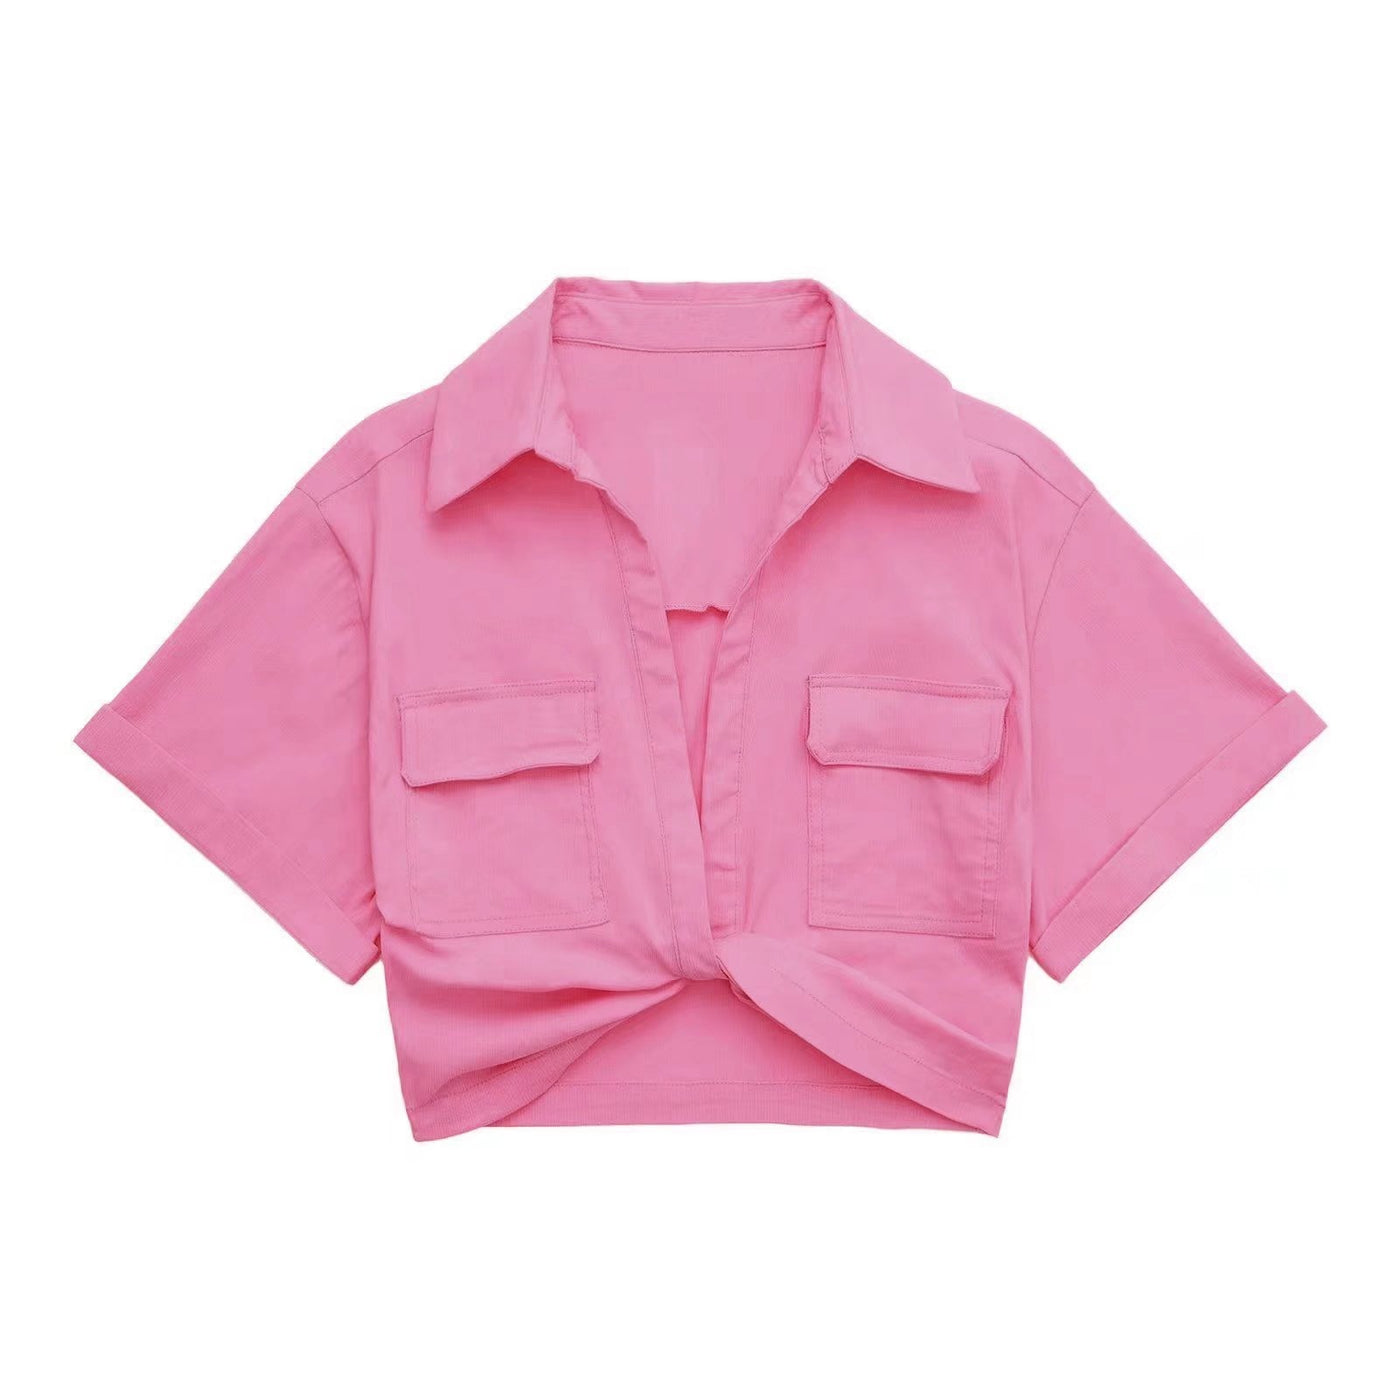 COCO Dayna Short Sleeves Wrapped Hem Cropped Shirt